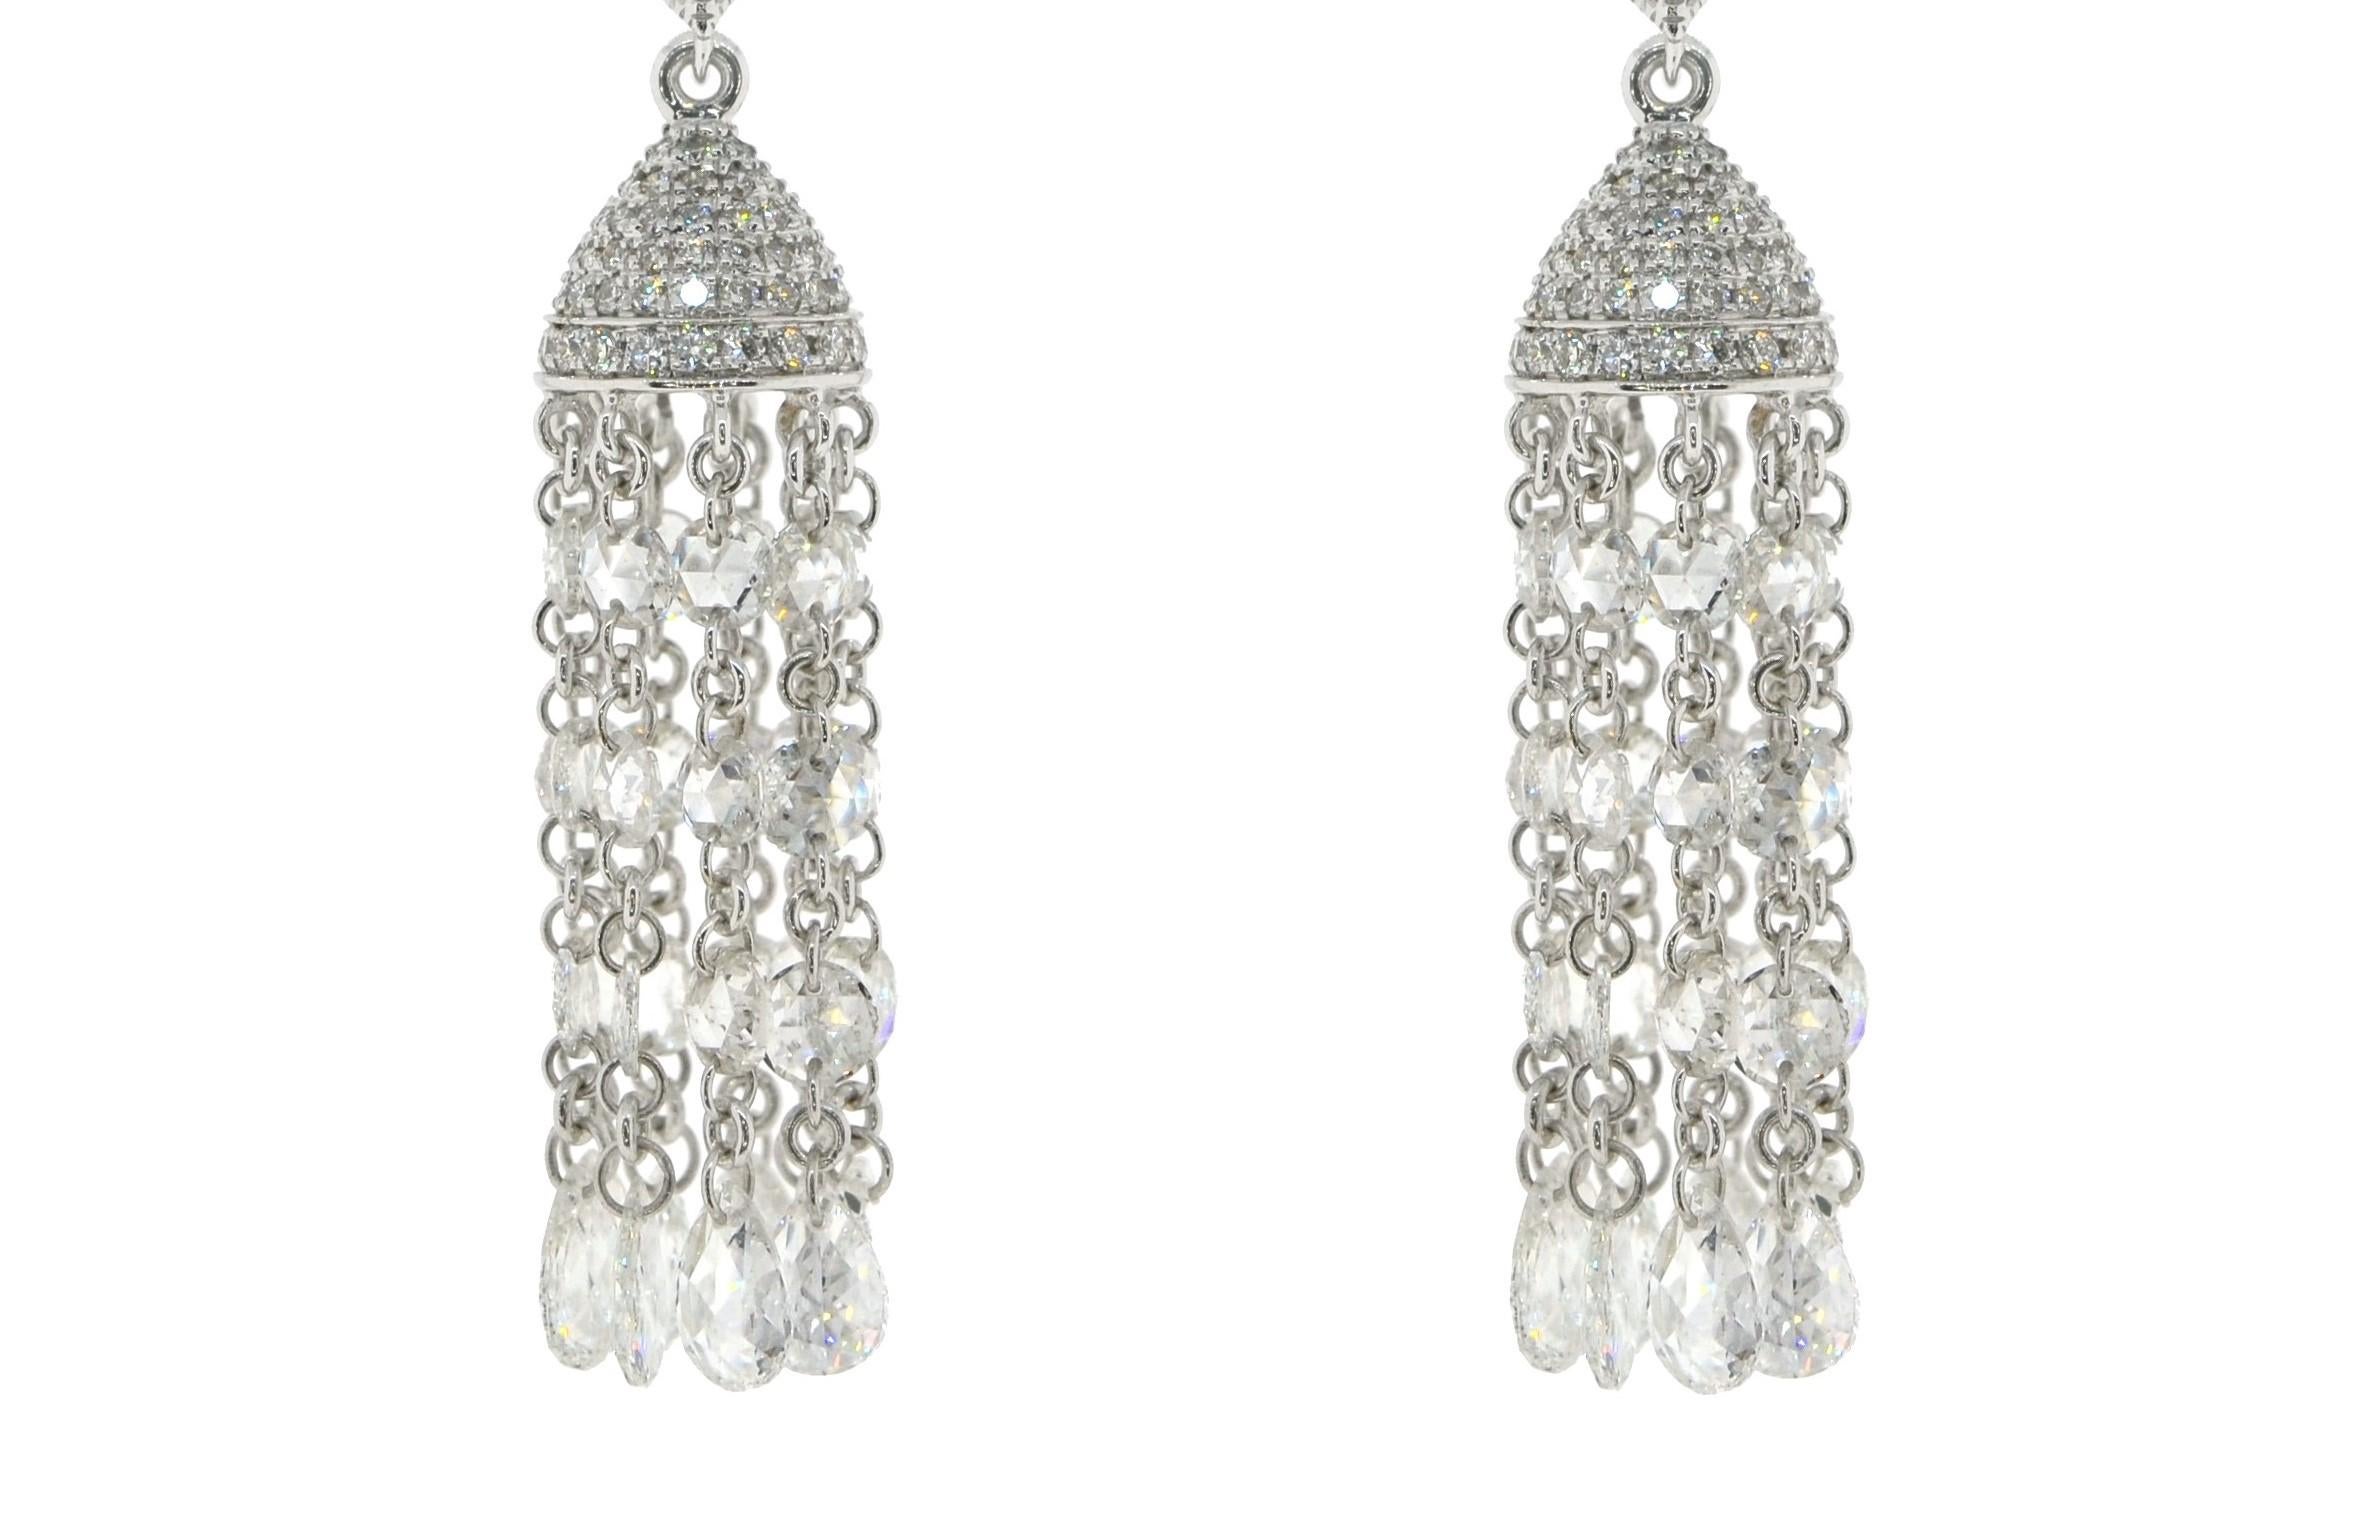 JR 5.80 Carat Rose Cut Diamond Tassel 18 Karat White Gold Earring

Stylish, graceful and elegant is what this pair of diamond tassel earring is. It moves with sheer grace and is made using excellent craftsmanship. its made using White Rose cut in